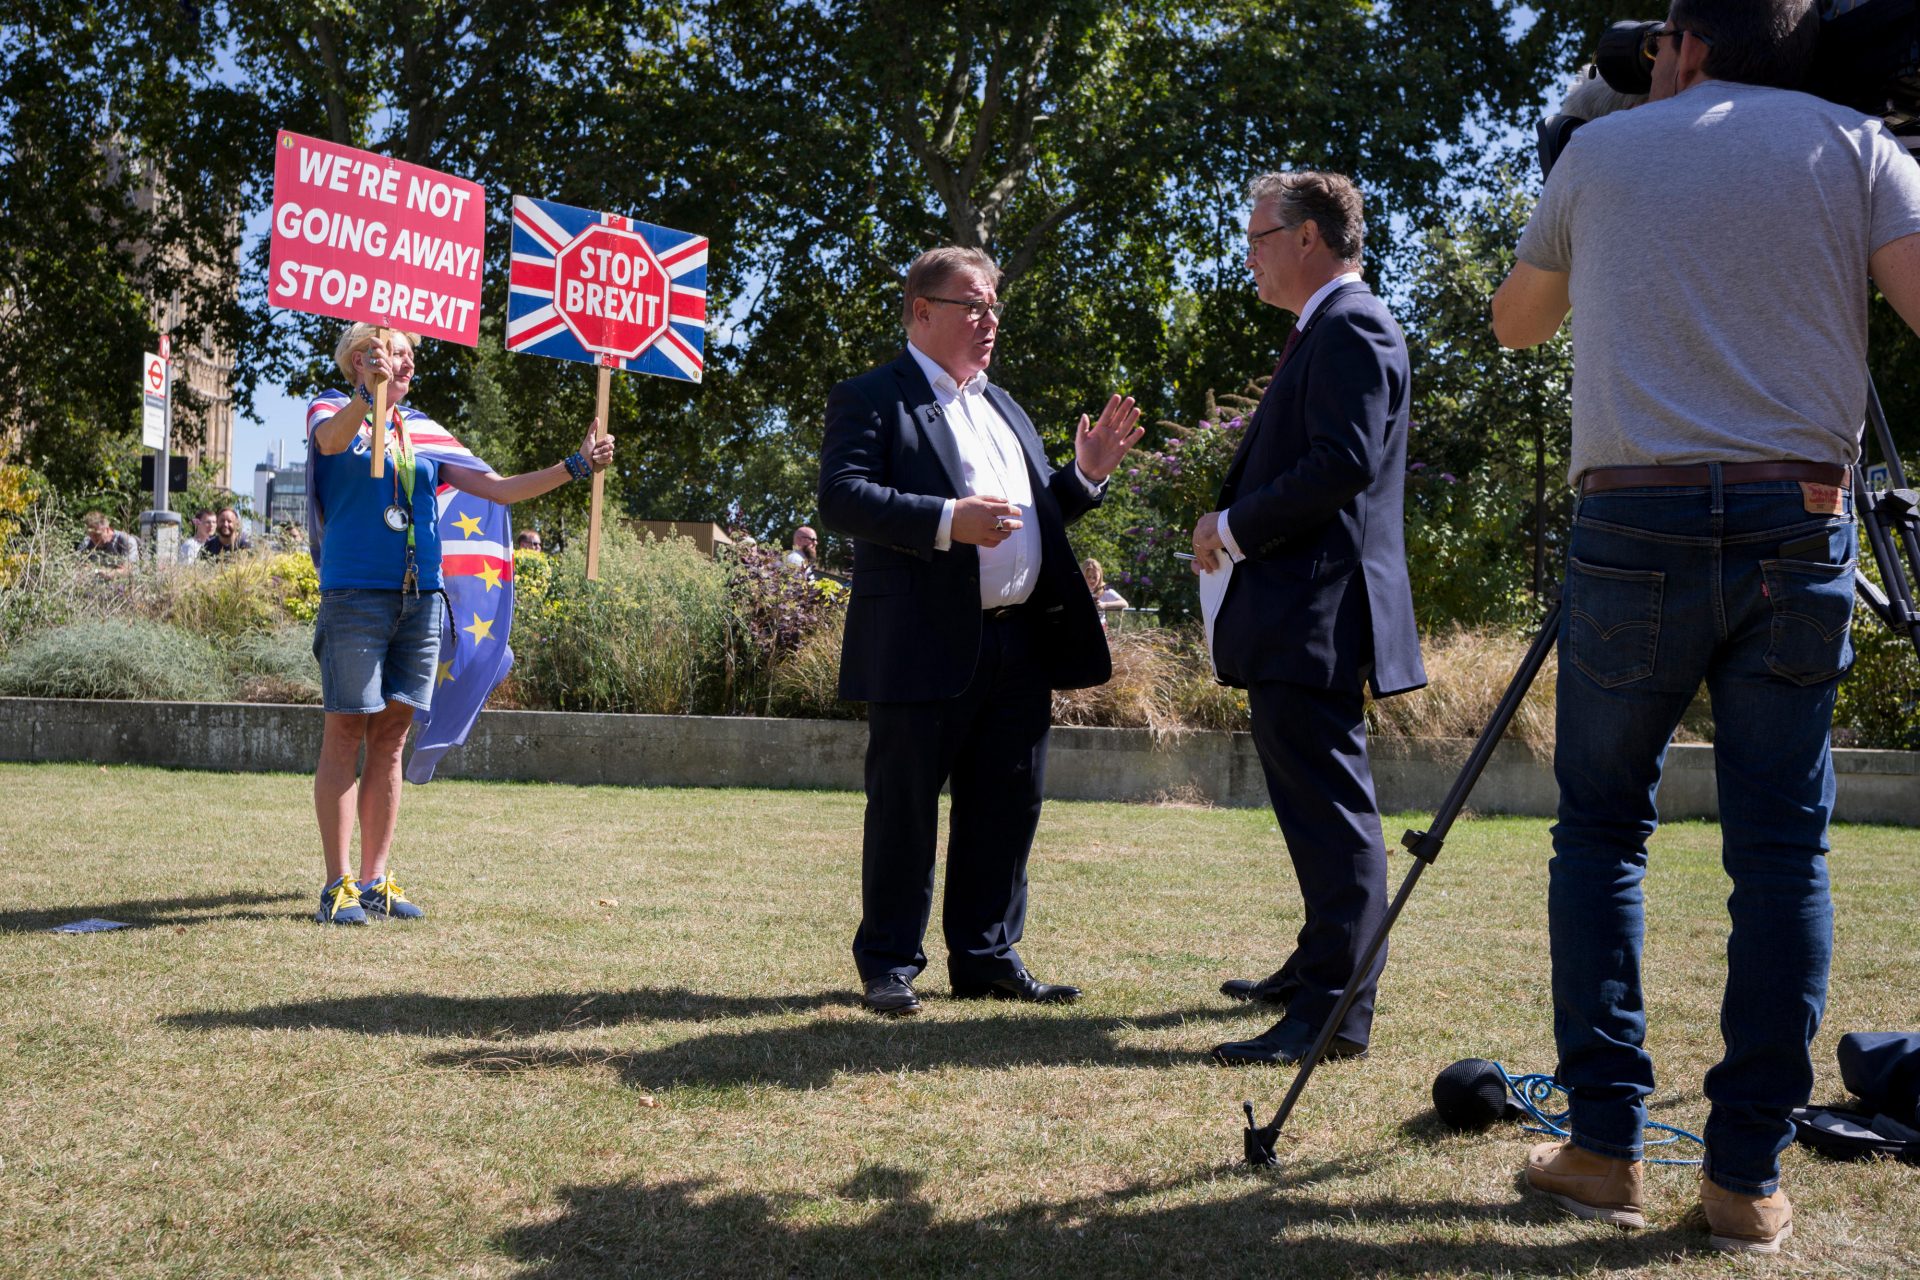 Brexiteer MP Mark Francois is interviewed on College Green in 2019. Photo: Richard Baker/In Pictures via Getty Images.